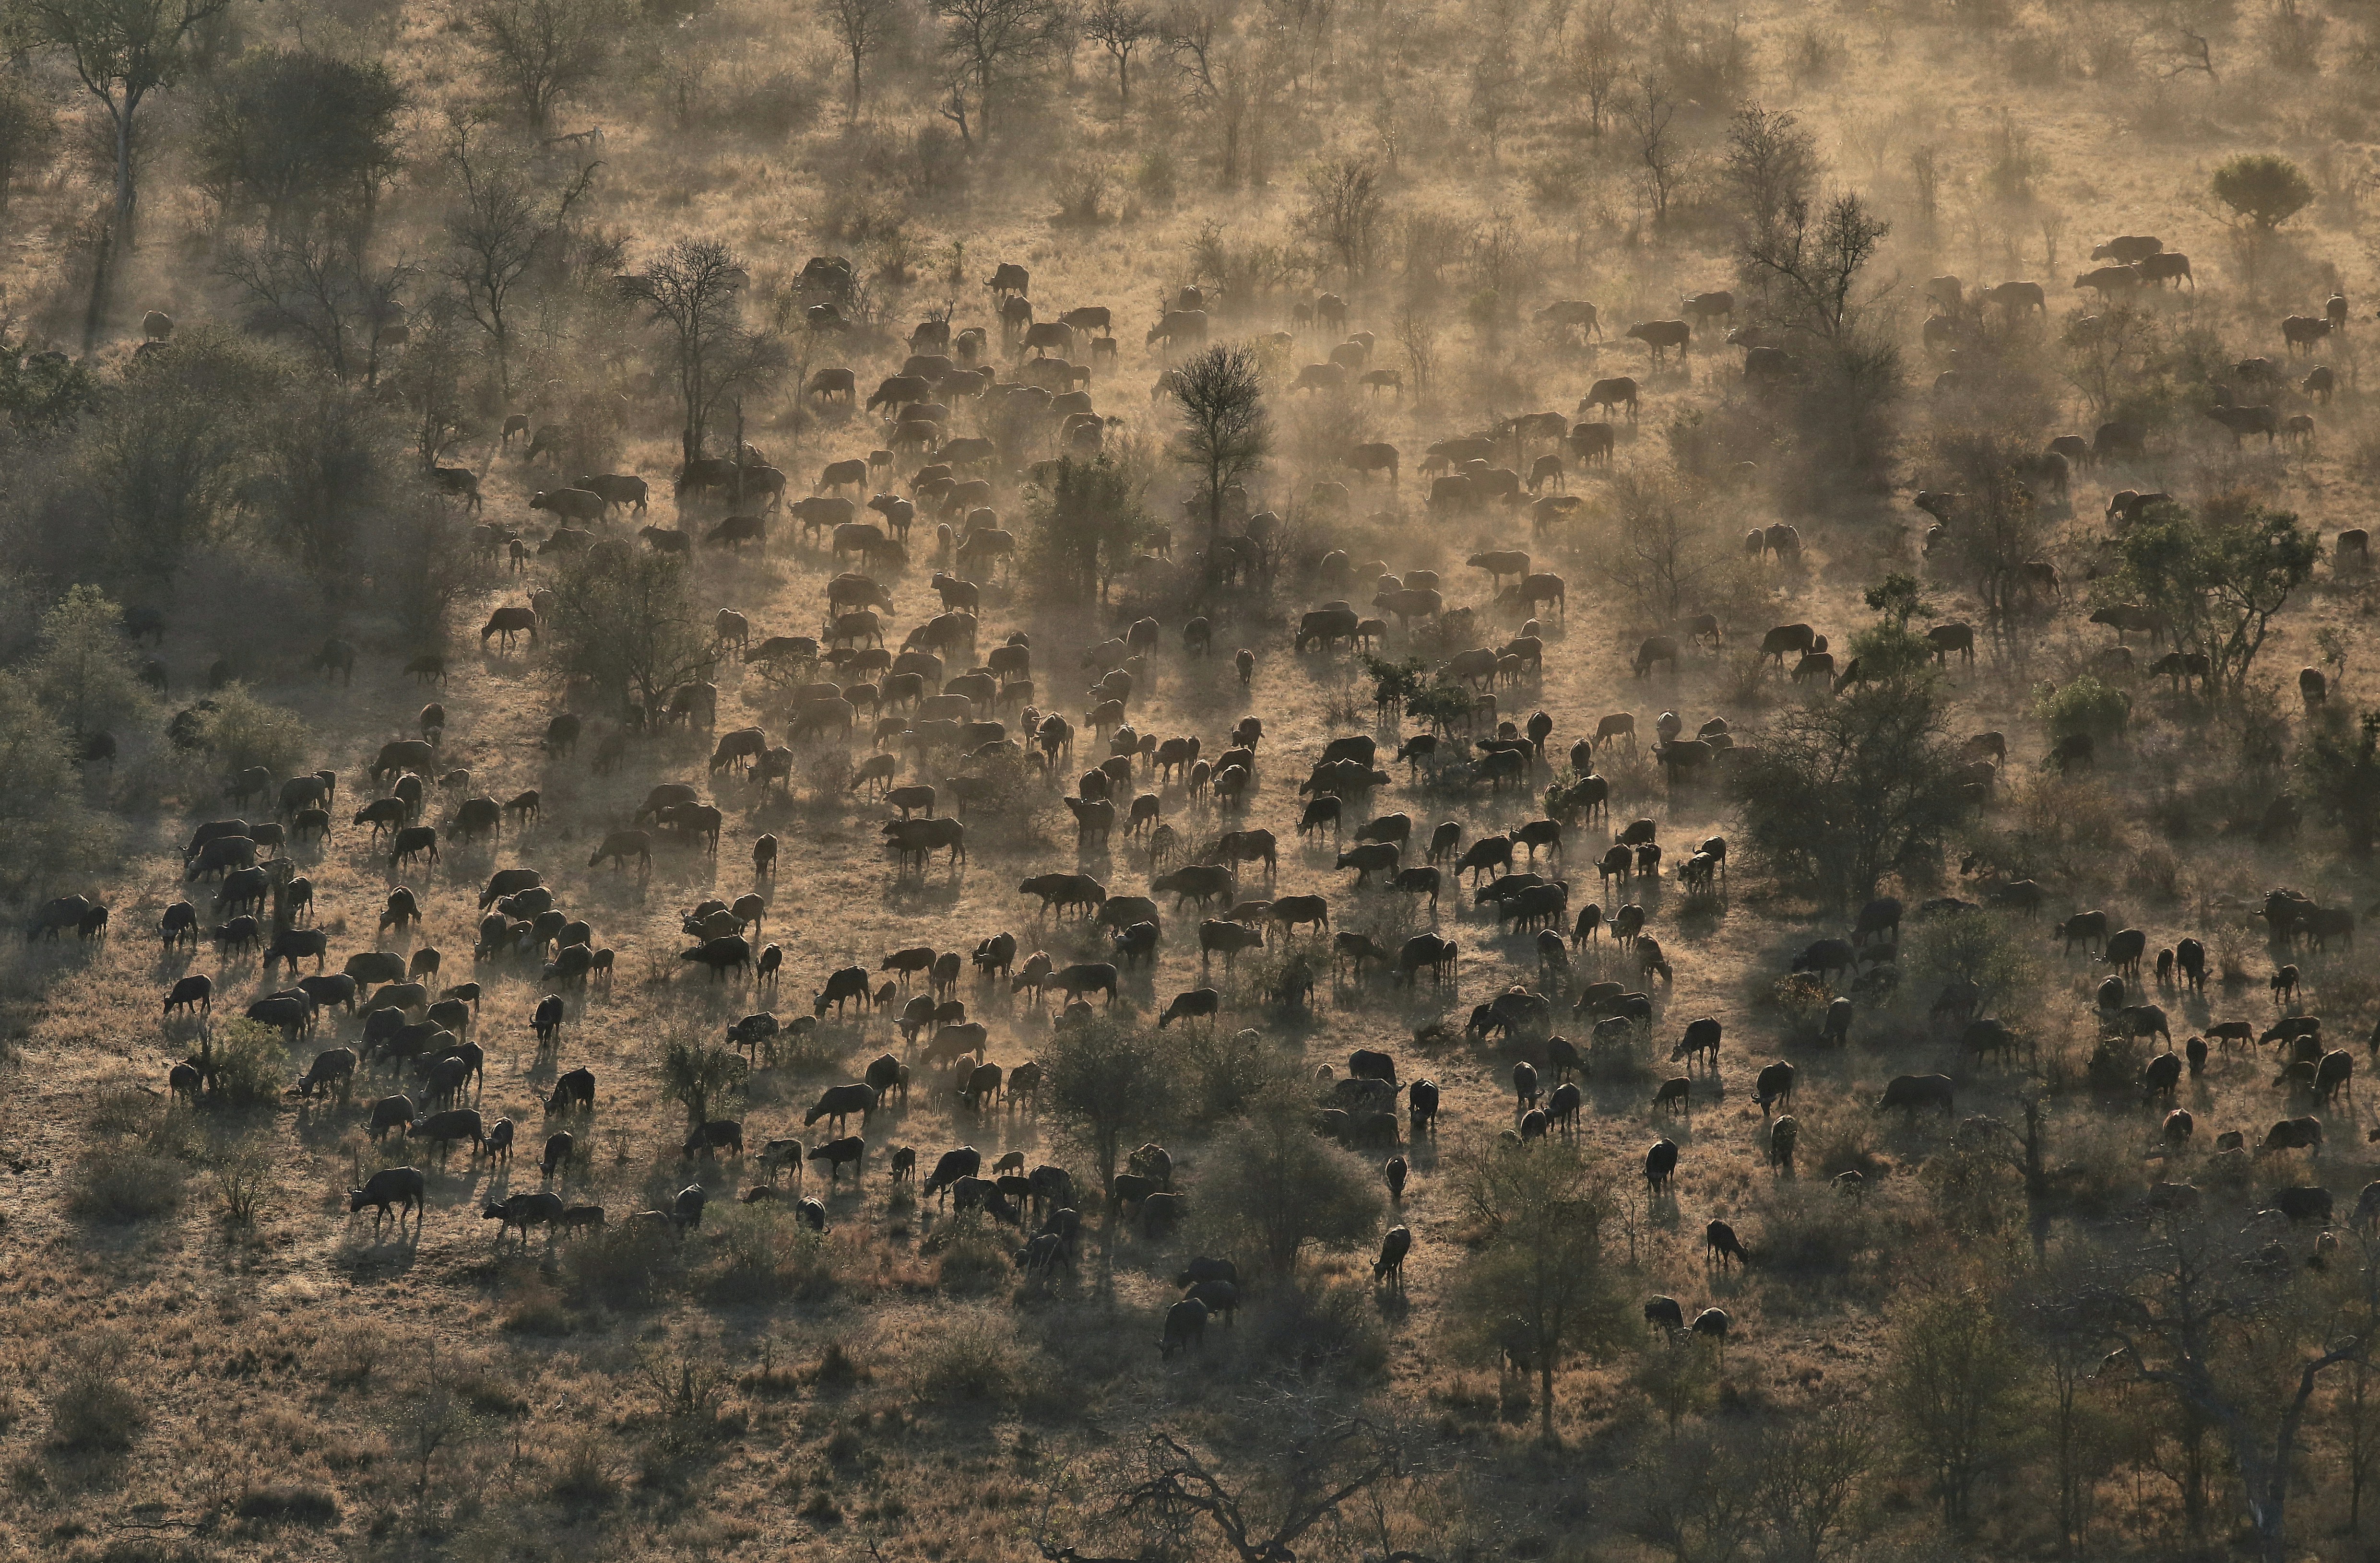 We mostly do technical aerial photography for terrain analysis and animal studies. Occasionally a scene presents itself, like this buffalo herd at sunrise and a few shots out the aircraft passengers window cannot be resisted.